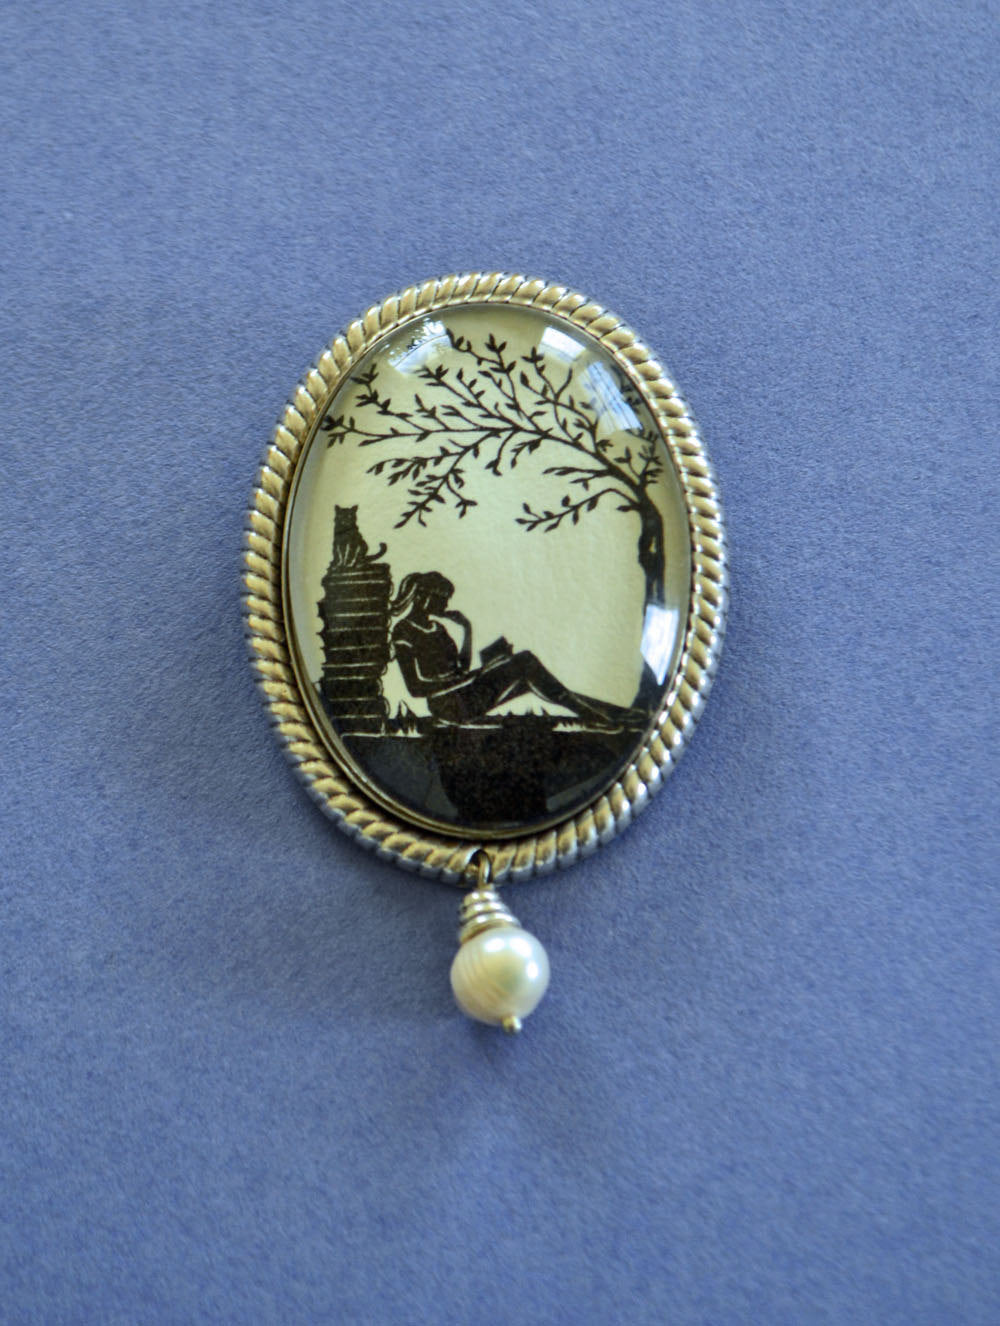 AFTERNOON READING in the PARK Brooch - Silhouette Jewelry